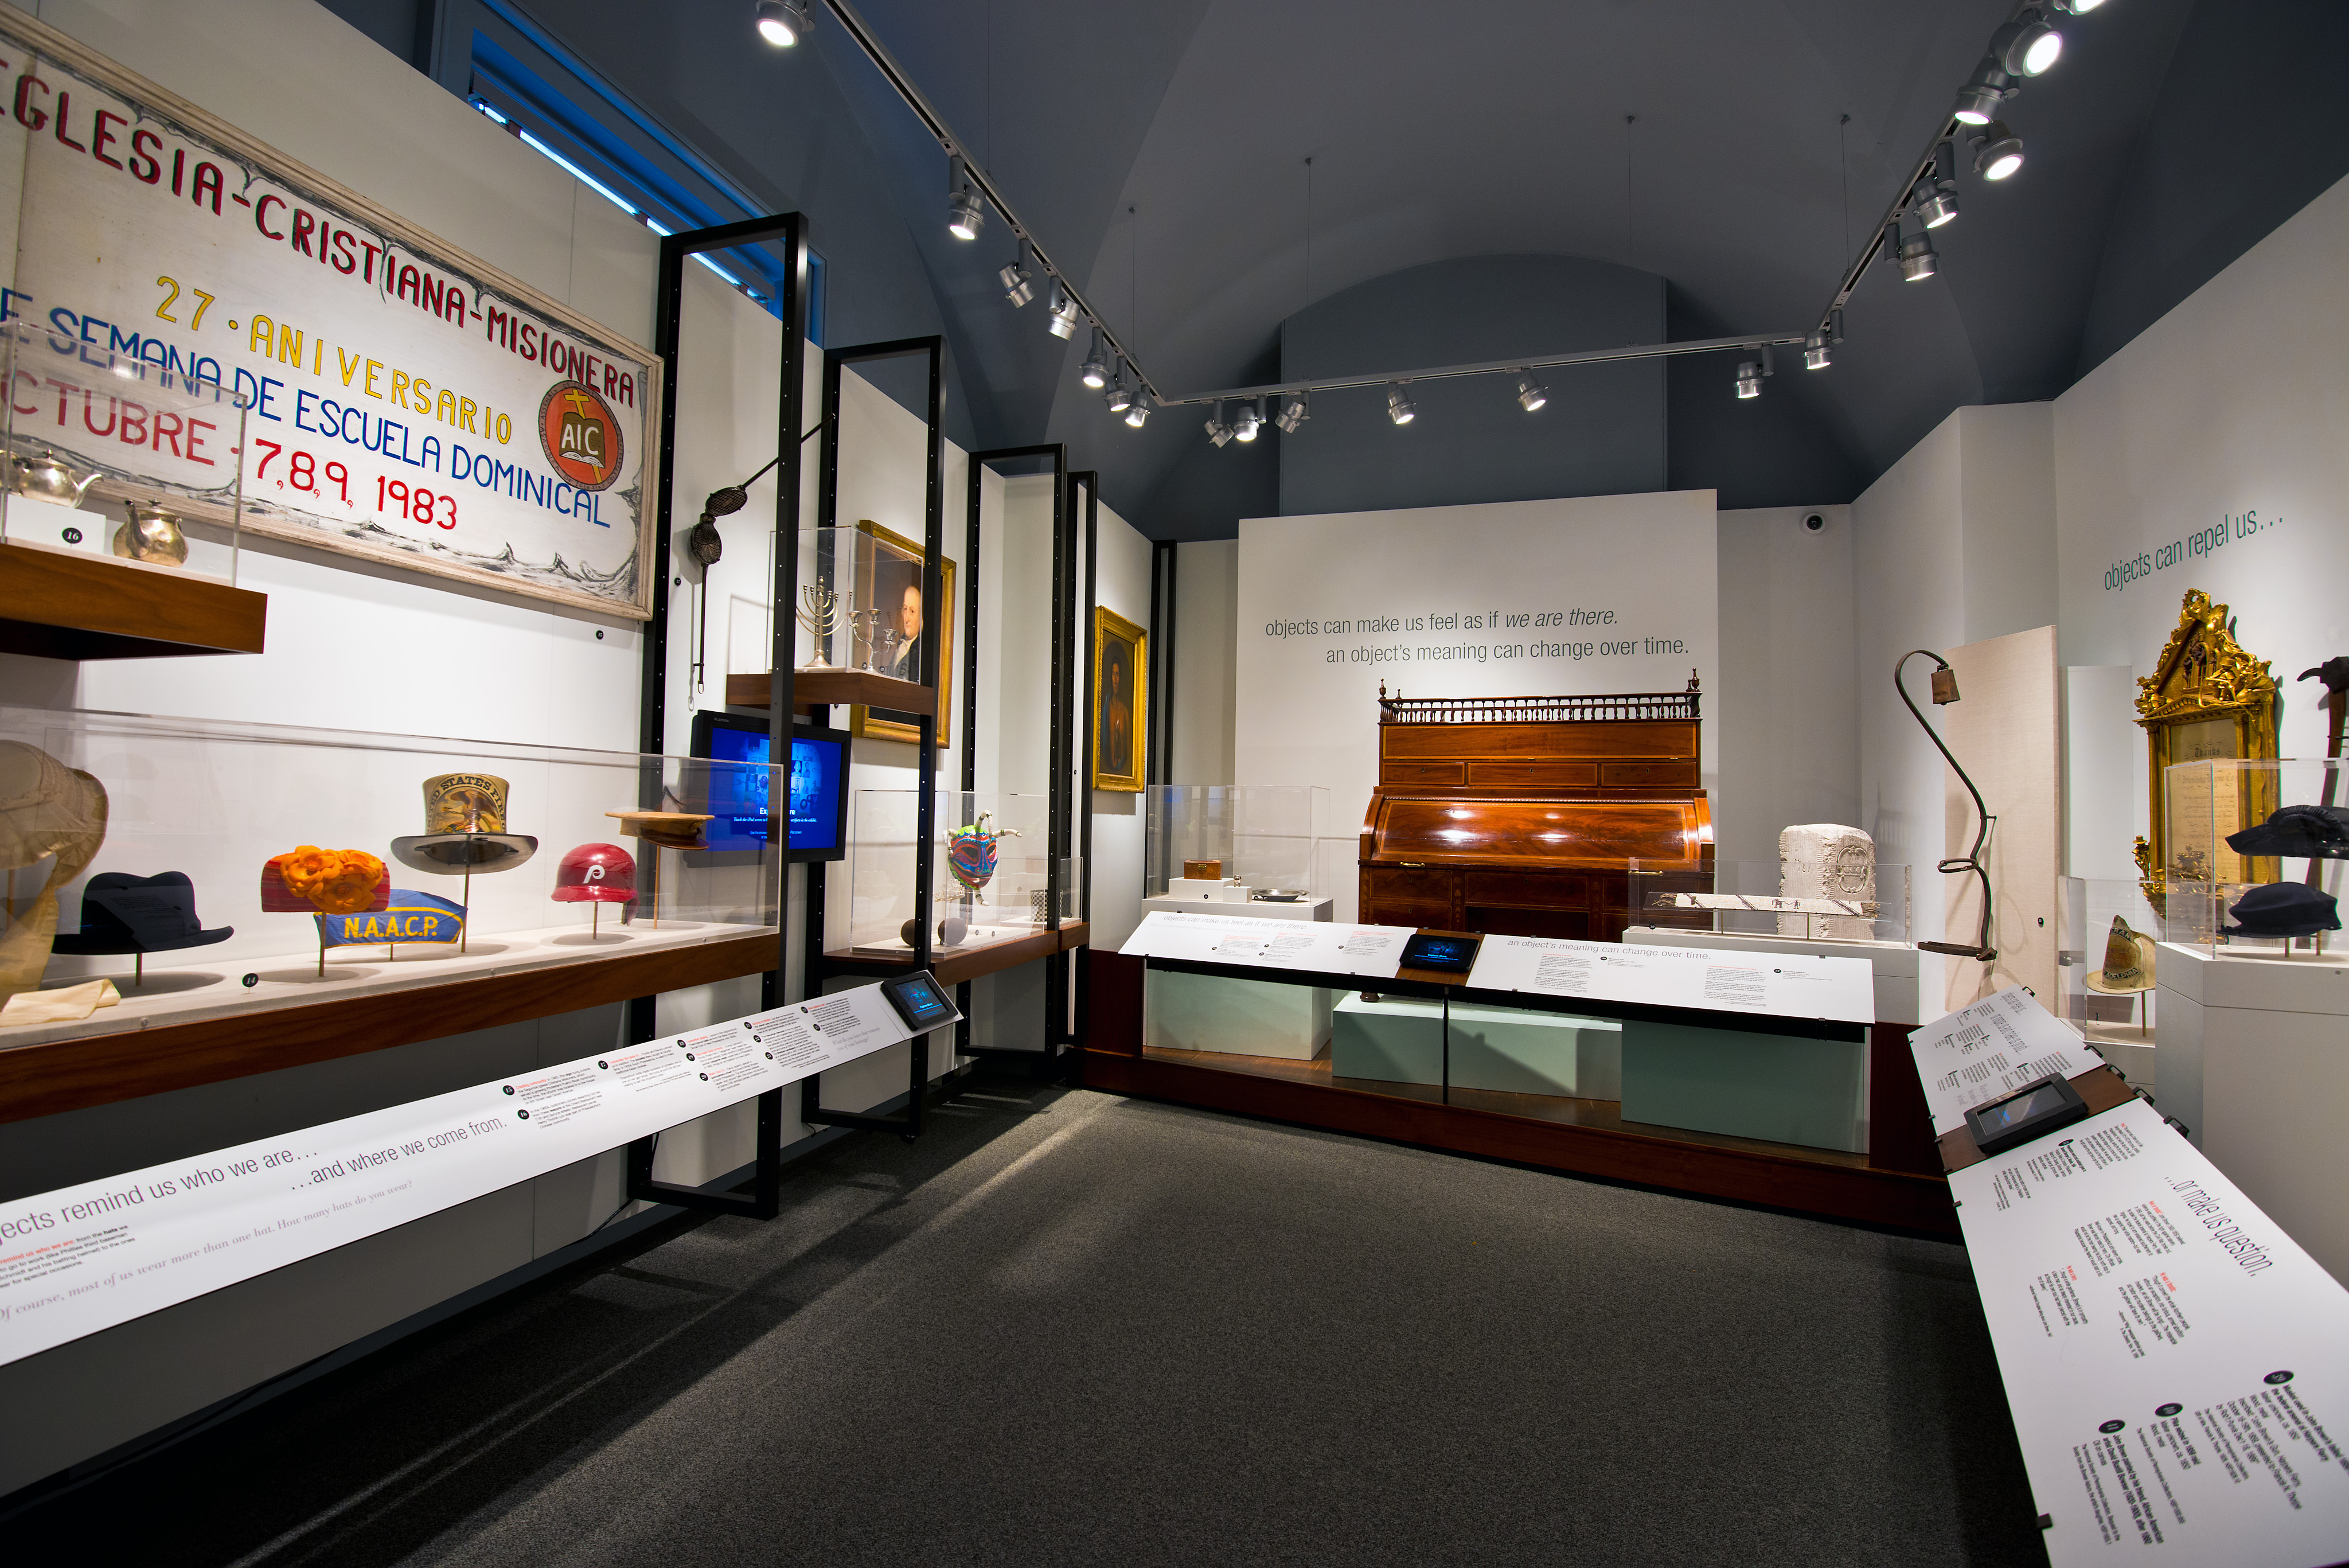 Photograph of artifacts in display cases.